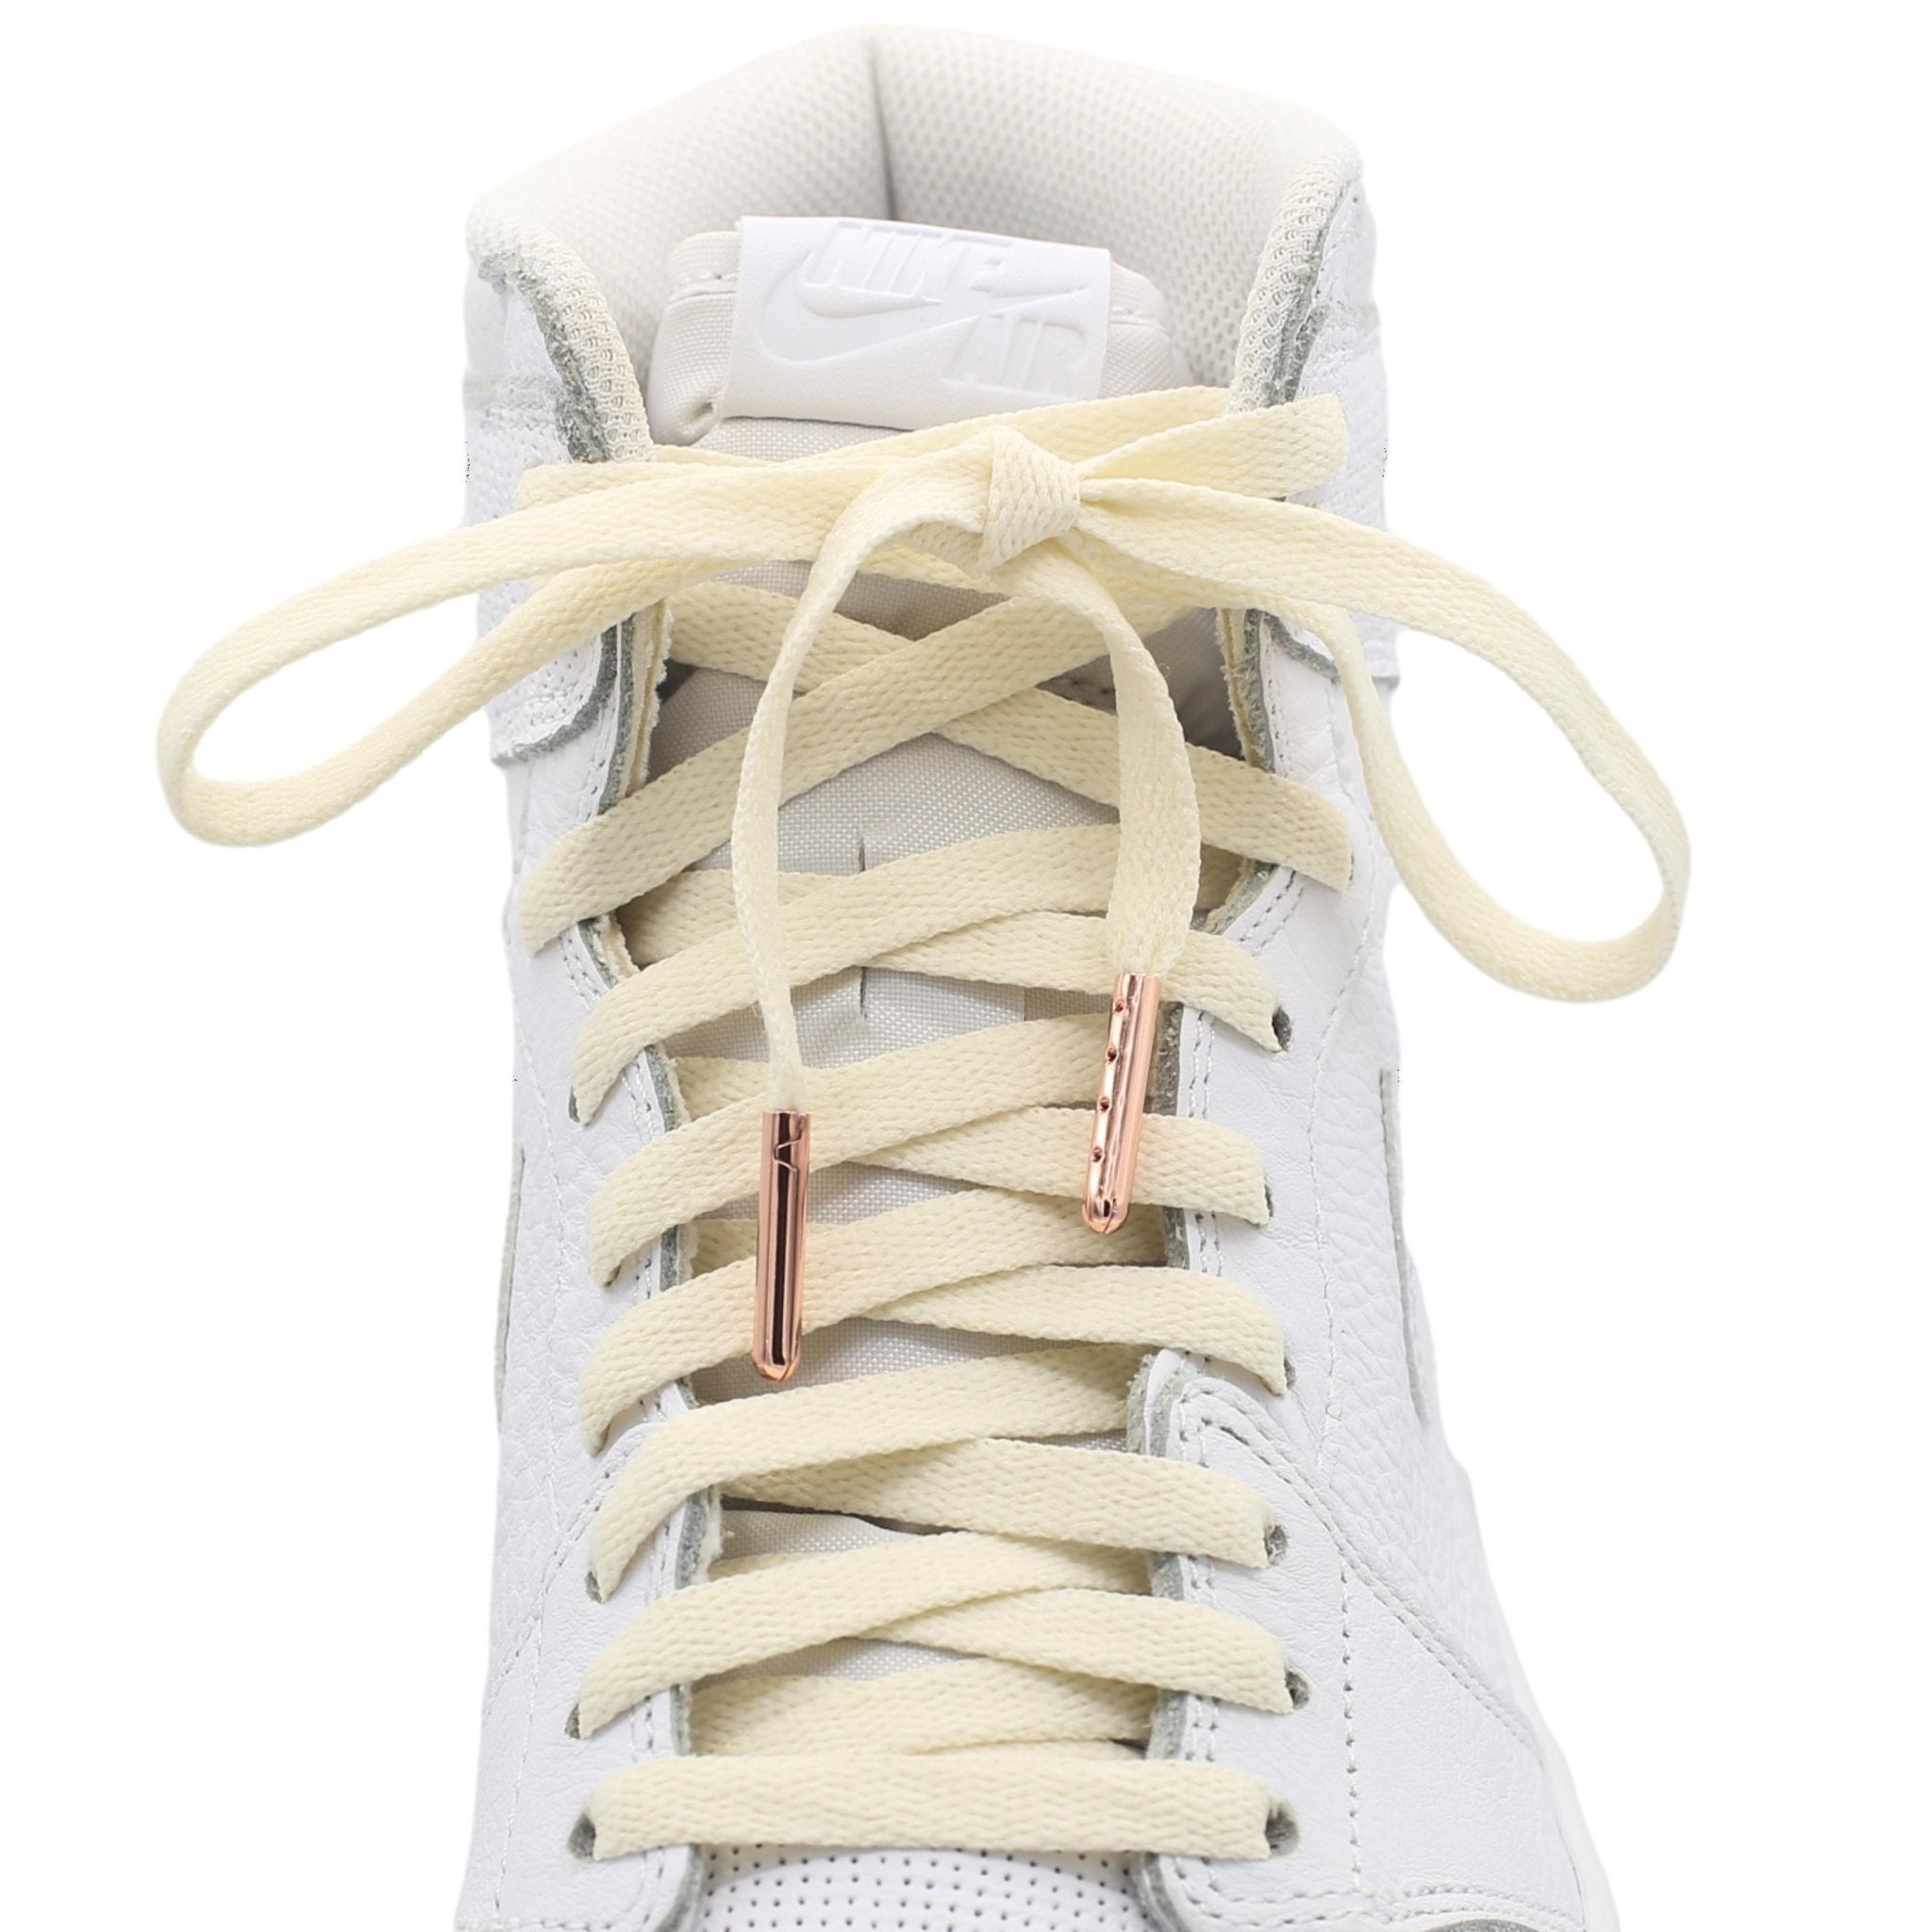 Sail Jordan Replacement Laces - Metal Tips (exclusive) - Shoe Lace Supply